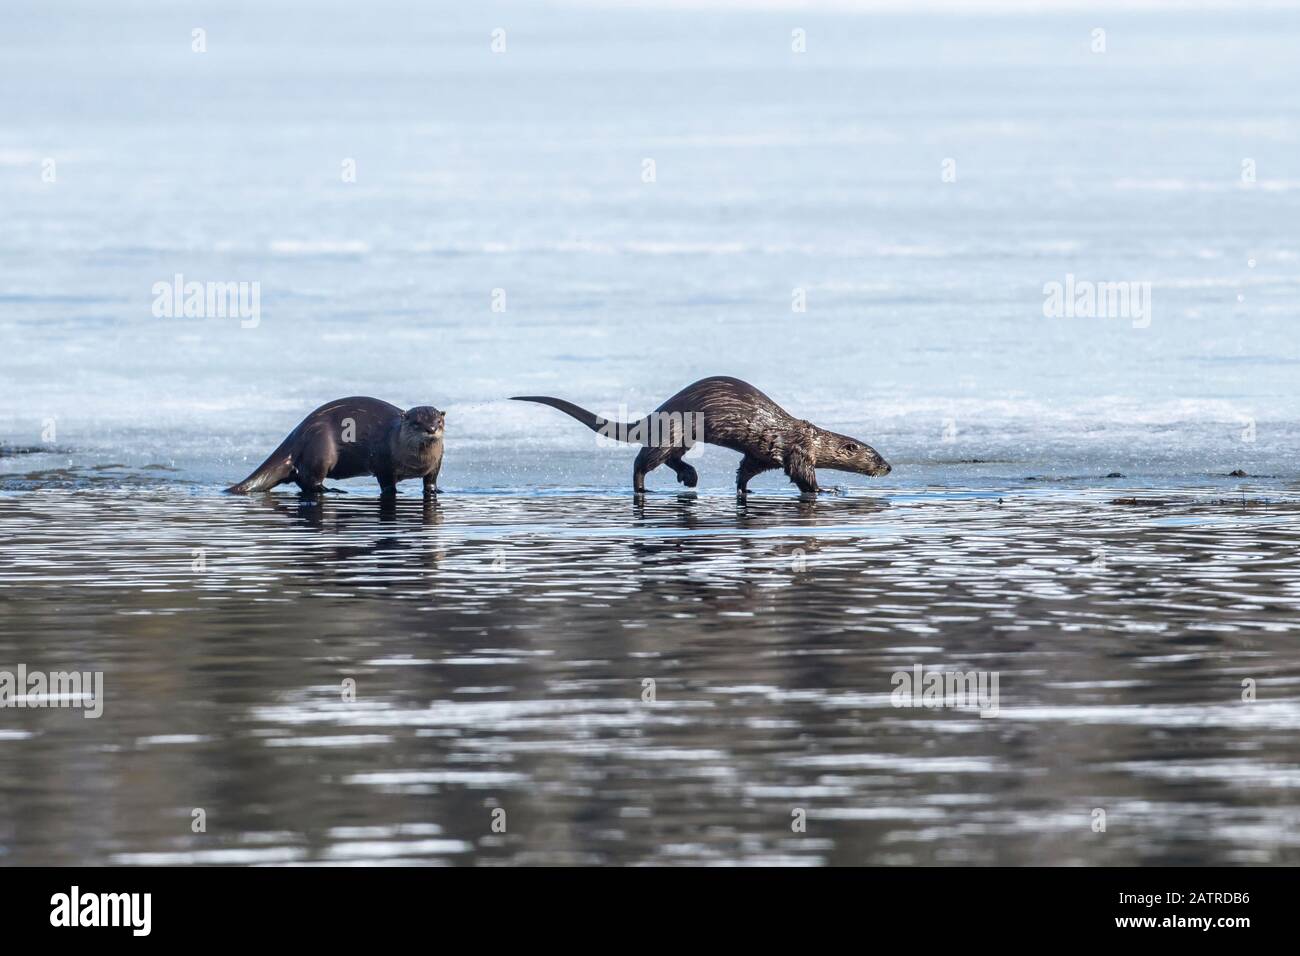 A pair of River Otters, sometimes called Land Otters (Lontra canadensis), fish in Lower Summit Lake on the Kenai Peninsula in spring when the ice i... Stock Photo